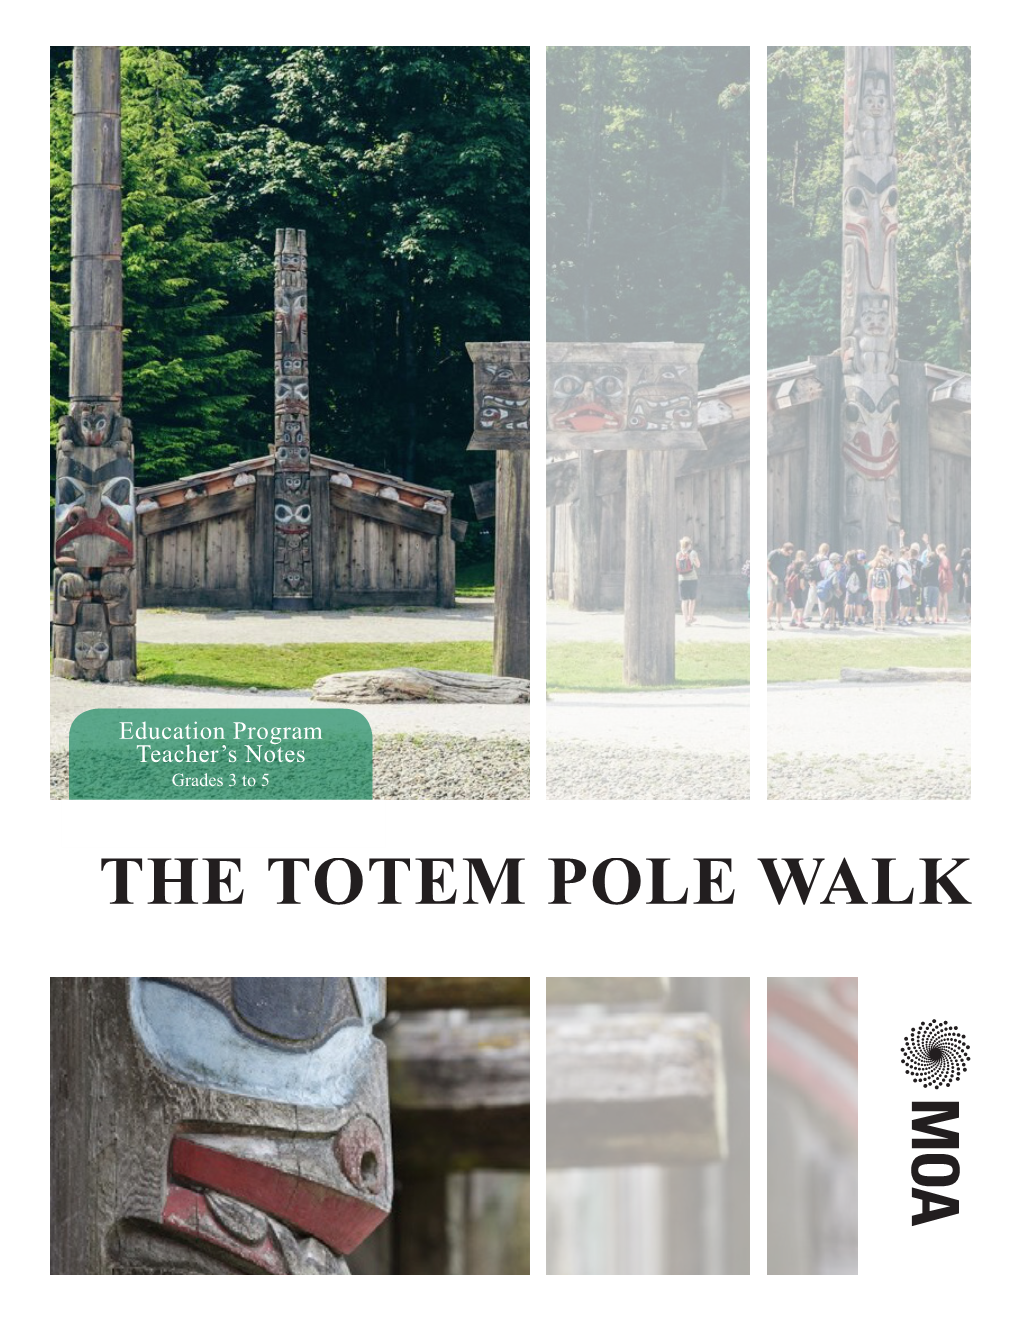 THE TOTEM POLE WALK Planning Your Visit PLANNING YOUR VISIT